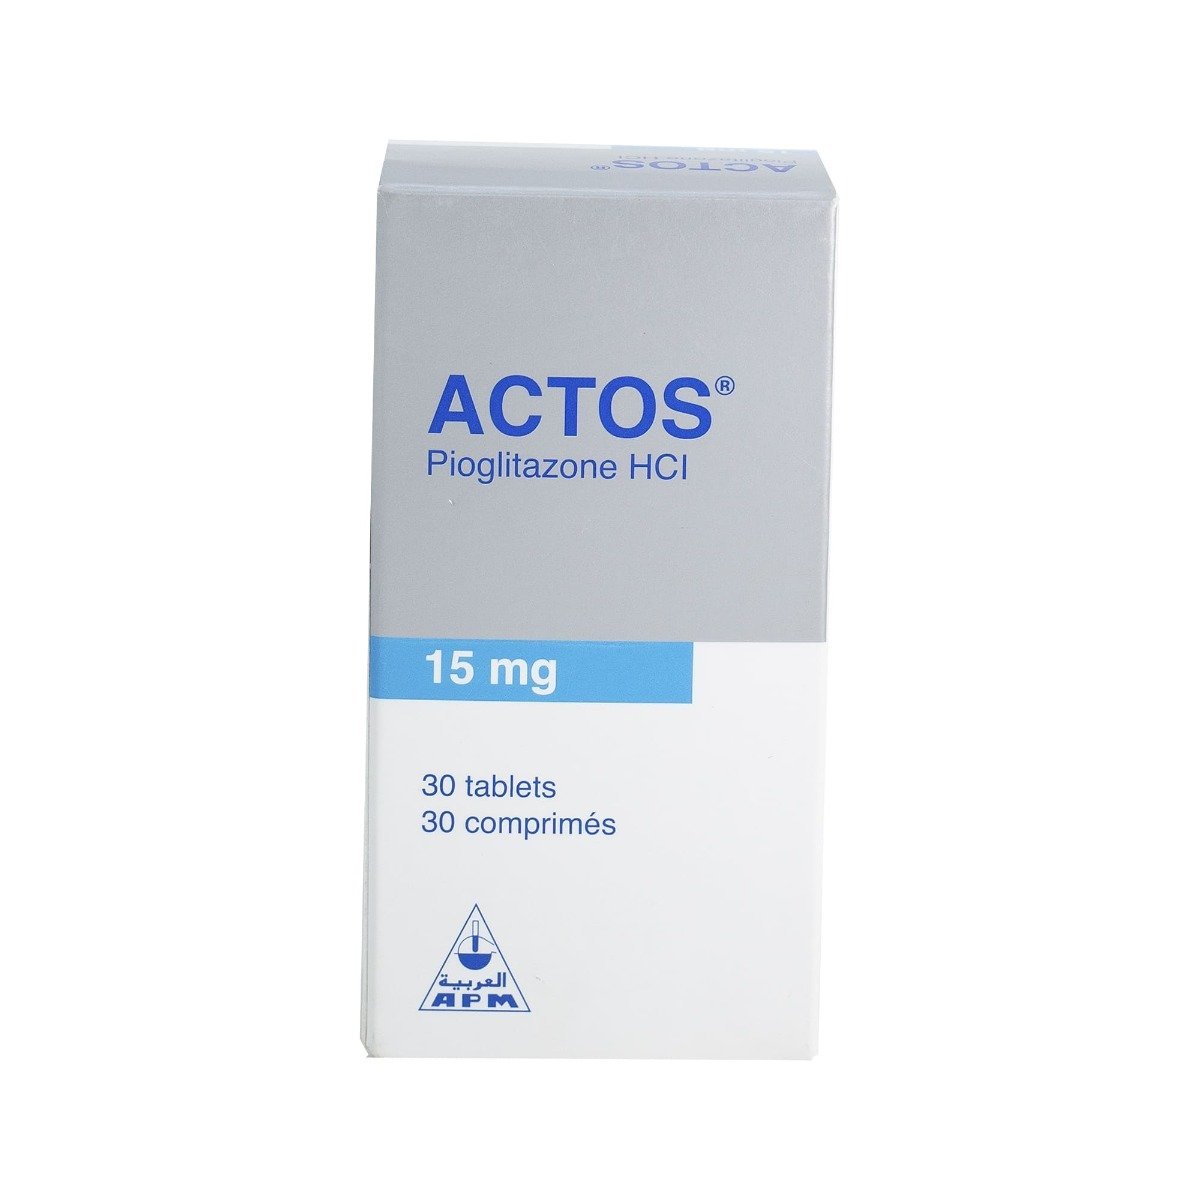 Actos 15 mg - 30 Tablets - Bloom Pharmacy